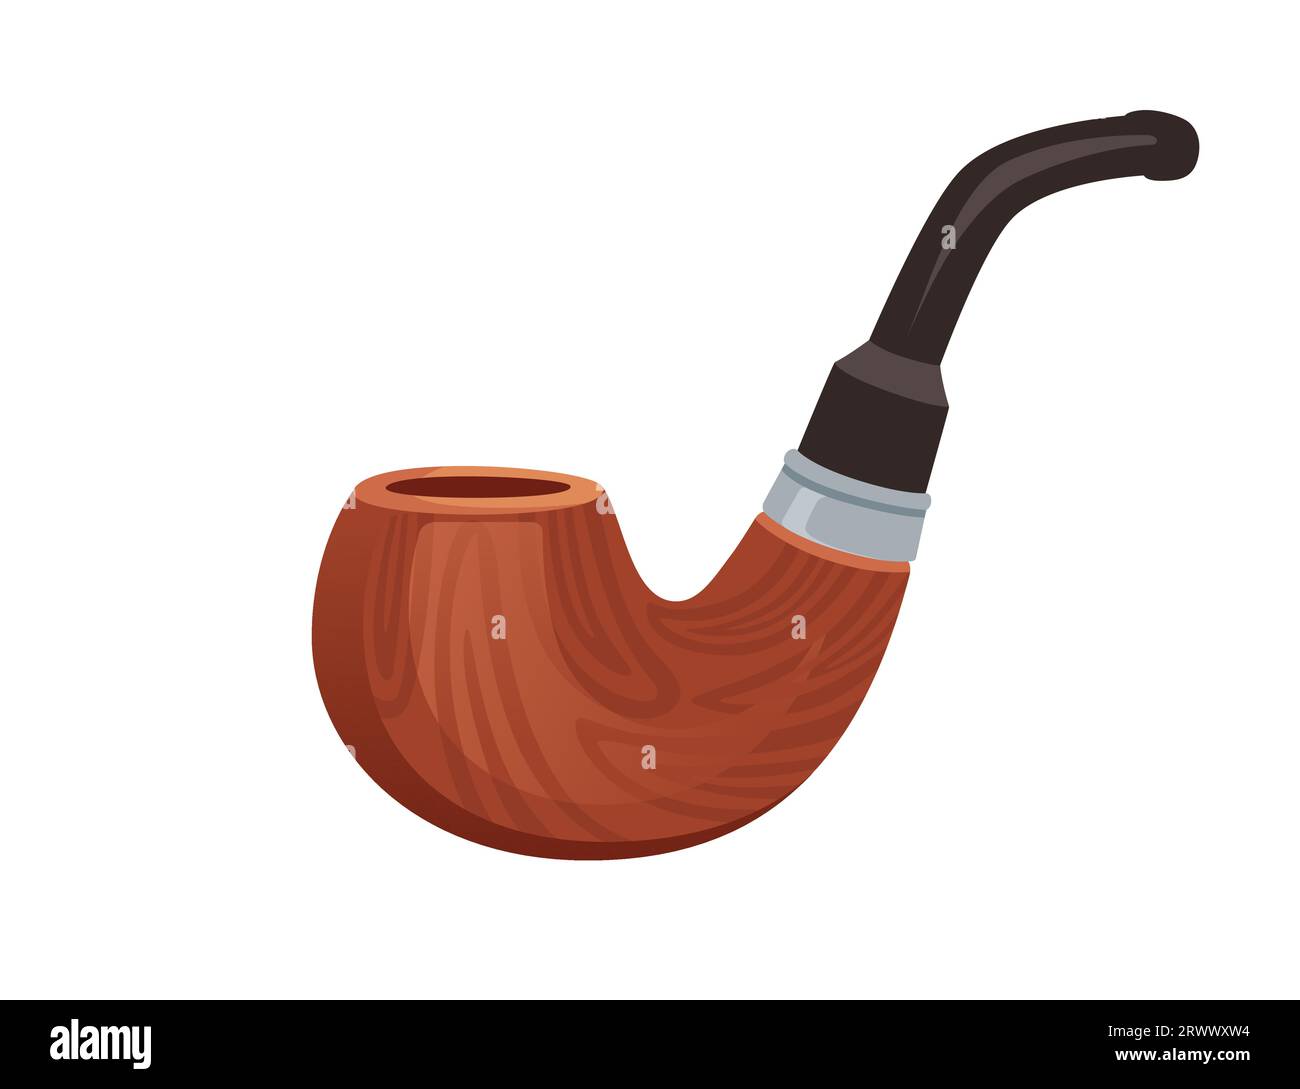 Classic wooden smoke pipe vector illustration isolated on white background Stock Vector